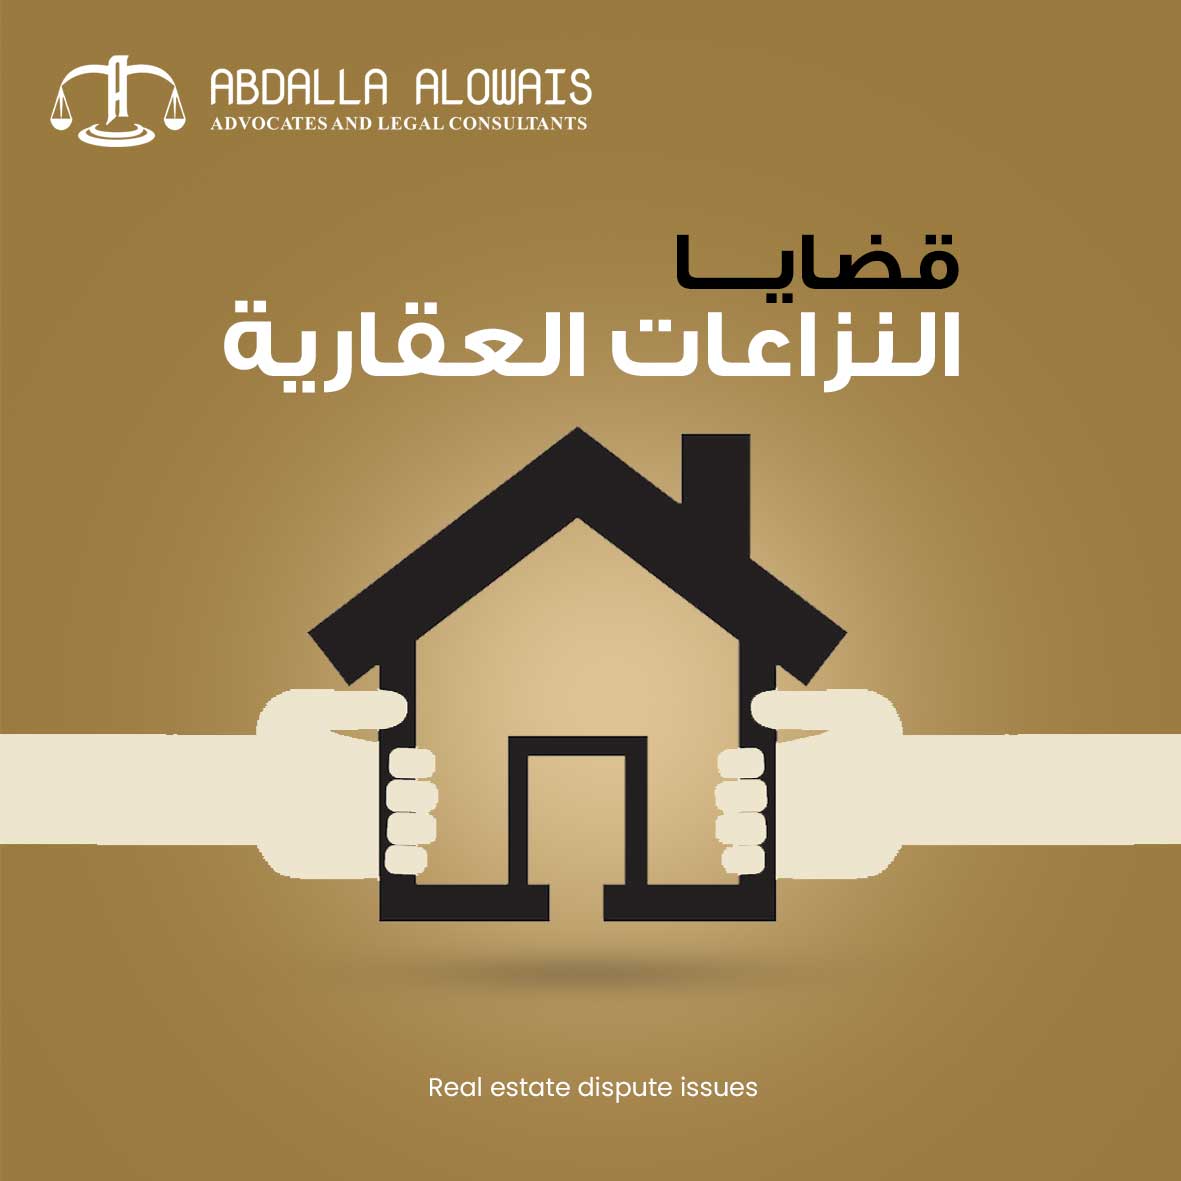 We provide all the required legal counsels to buy and lease real estate follow-up the disputes that may arise based on that and organize the investors’ relationships and sales operation on the map, 

#law
#lawyers
#Abdalla_Alowais
#ValuesMatter #LawFirmCulture